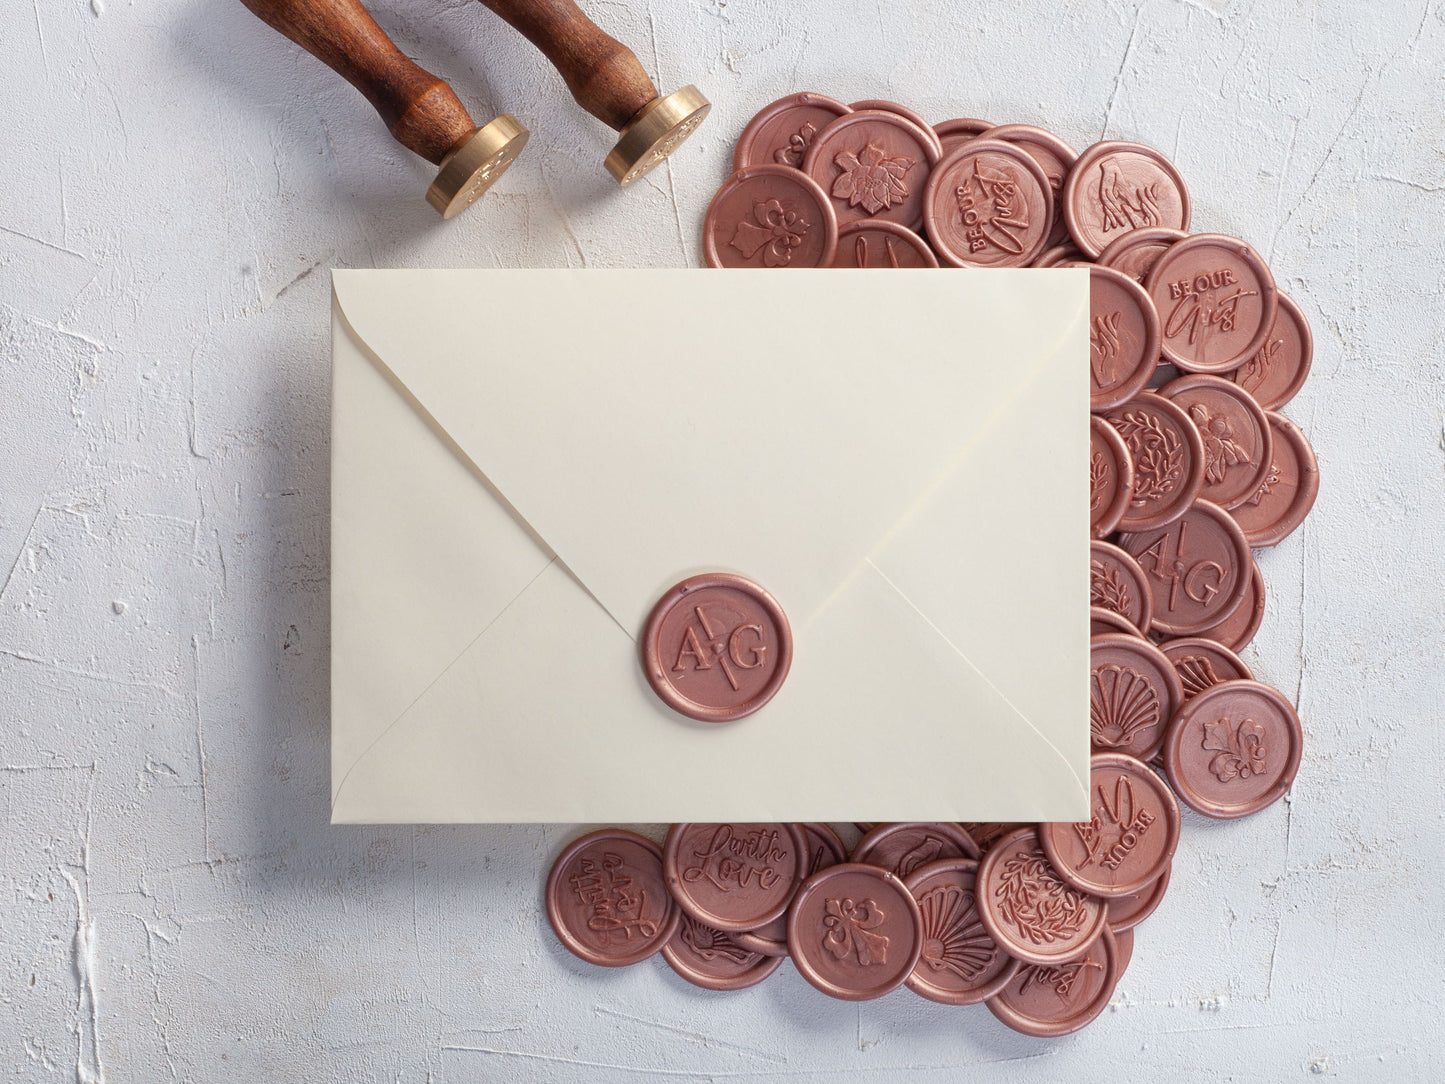 Handmade Rose Gold Wax and Seal Set for Personalized Wedding Invitations